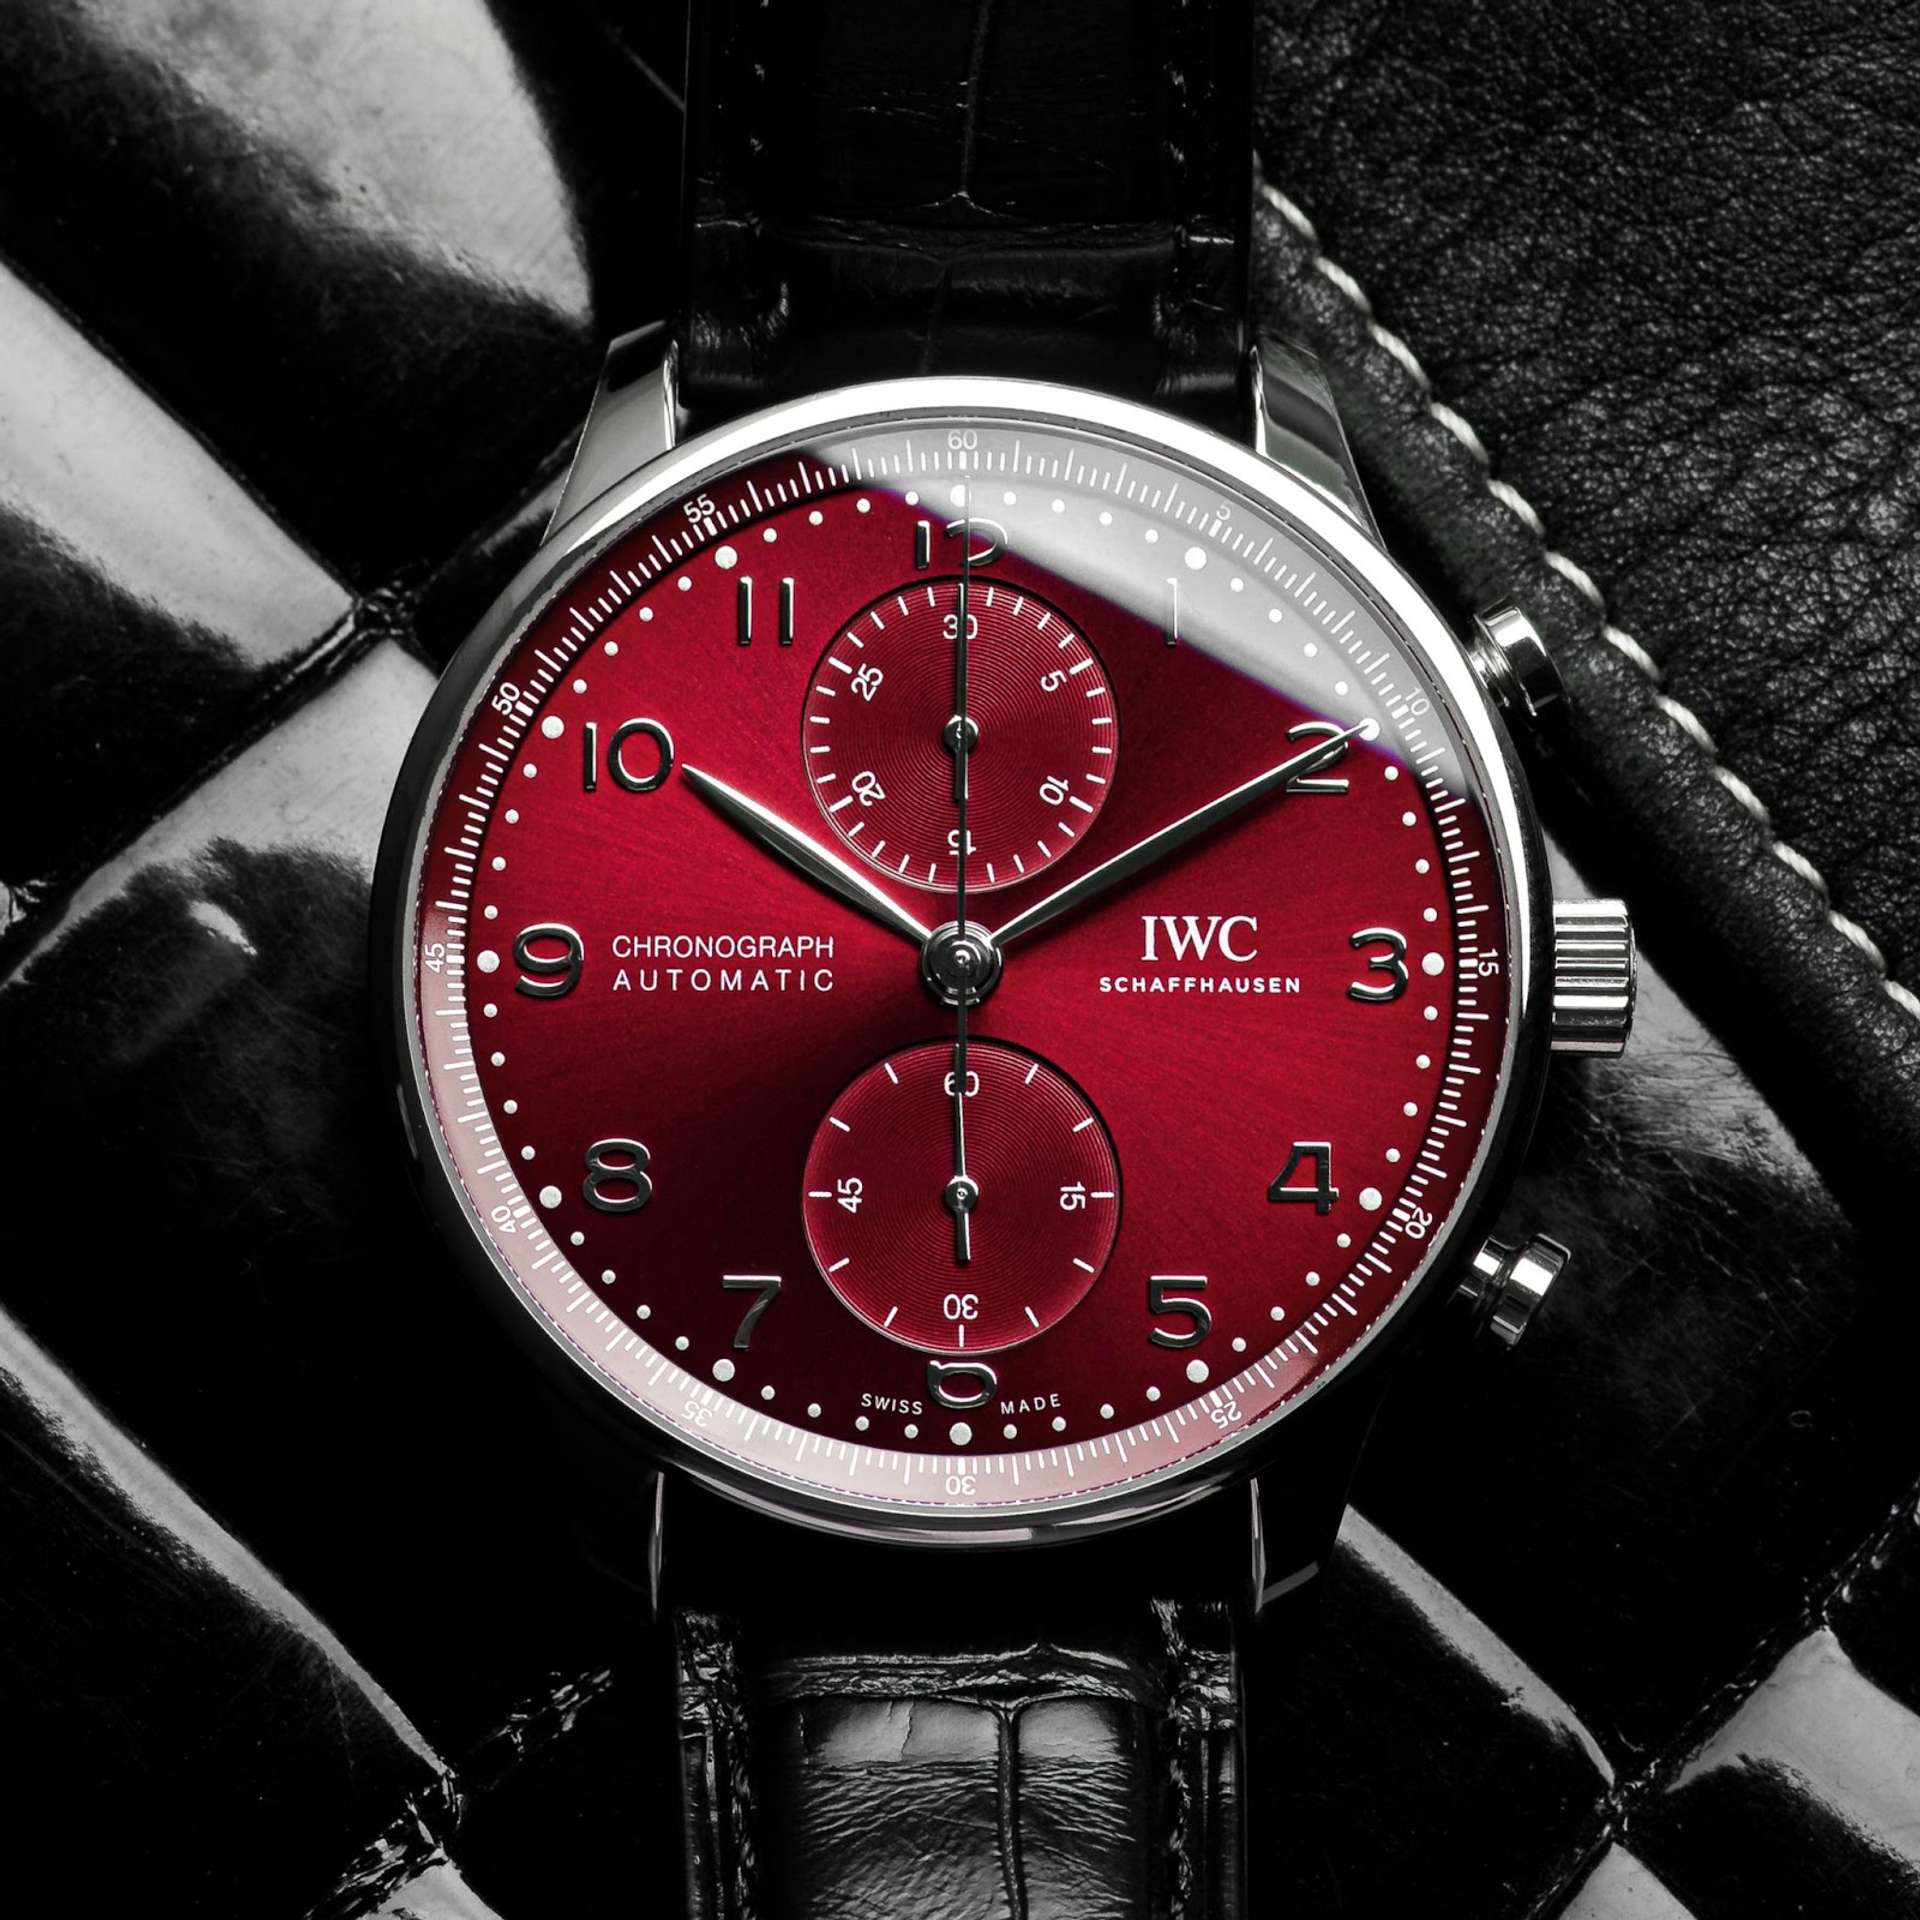 An IWC Portugieser Chronograph with a burgundy dial, first launched in 1939.